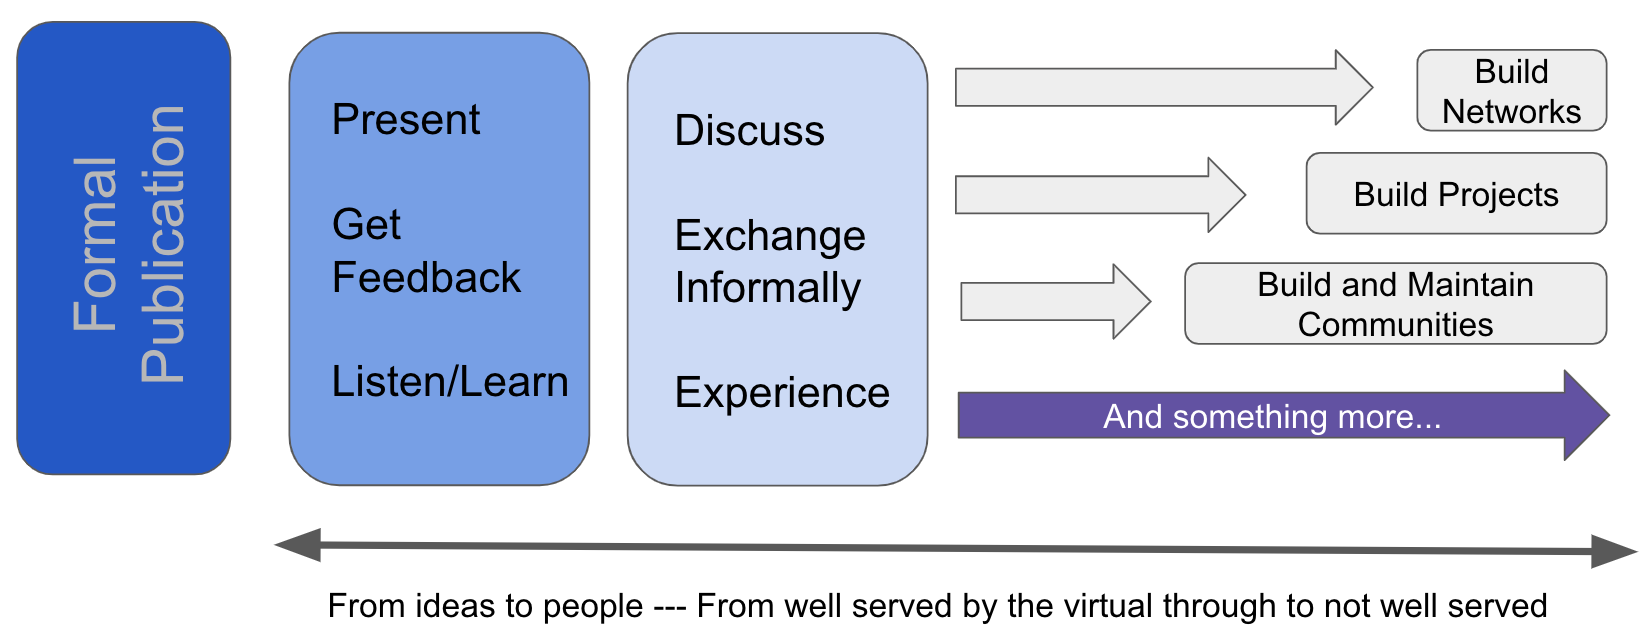 flowchart of crowdsourced responses to what purposes serve, arranged
                        from left to right in order of which purposes are well-served by virtual
                        platforms to which are poorly served. From best-served to worst-served, the
                        groups of purposes are: Formal publication; Present, get feedback,
                        listen/learn; Discuss, exchange informally, experience; and Build networks,
                        build projects, build/maintain communities, something more...